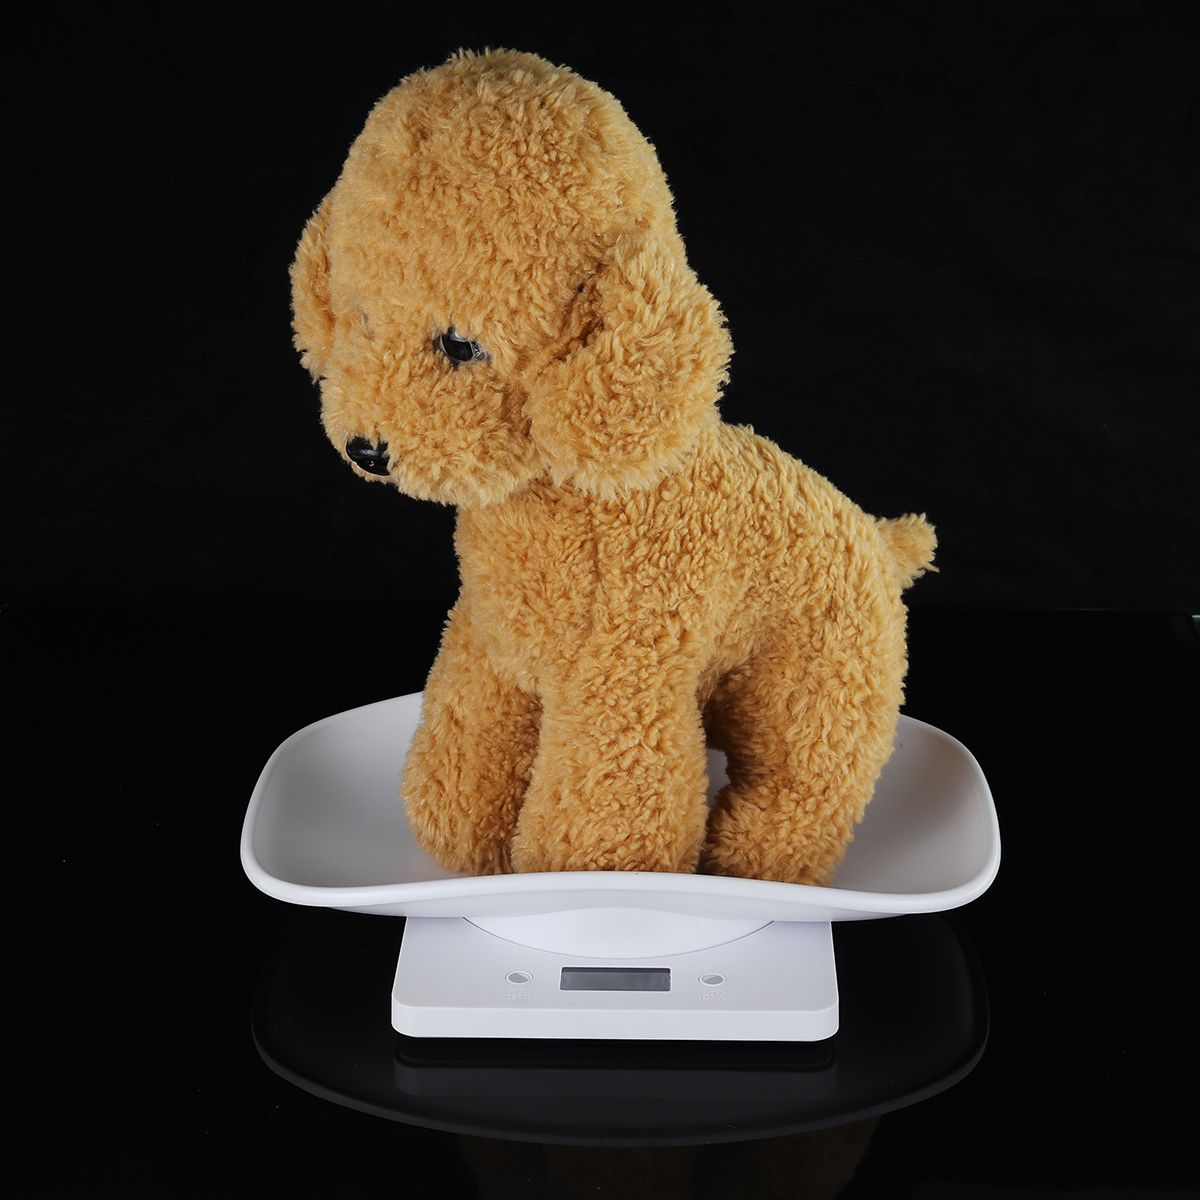 Electronic-Digital-Baby-Pet-Scale-Measure-InfantBaby-Weight-Accurately-1g-10kg-1569029